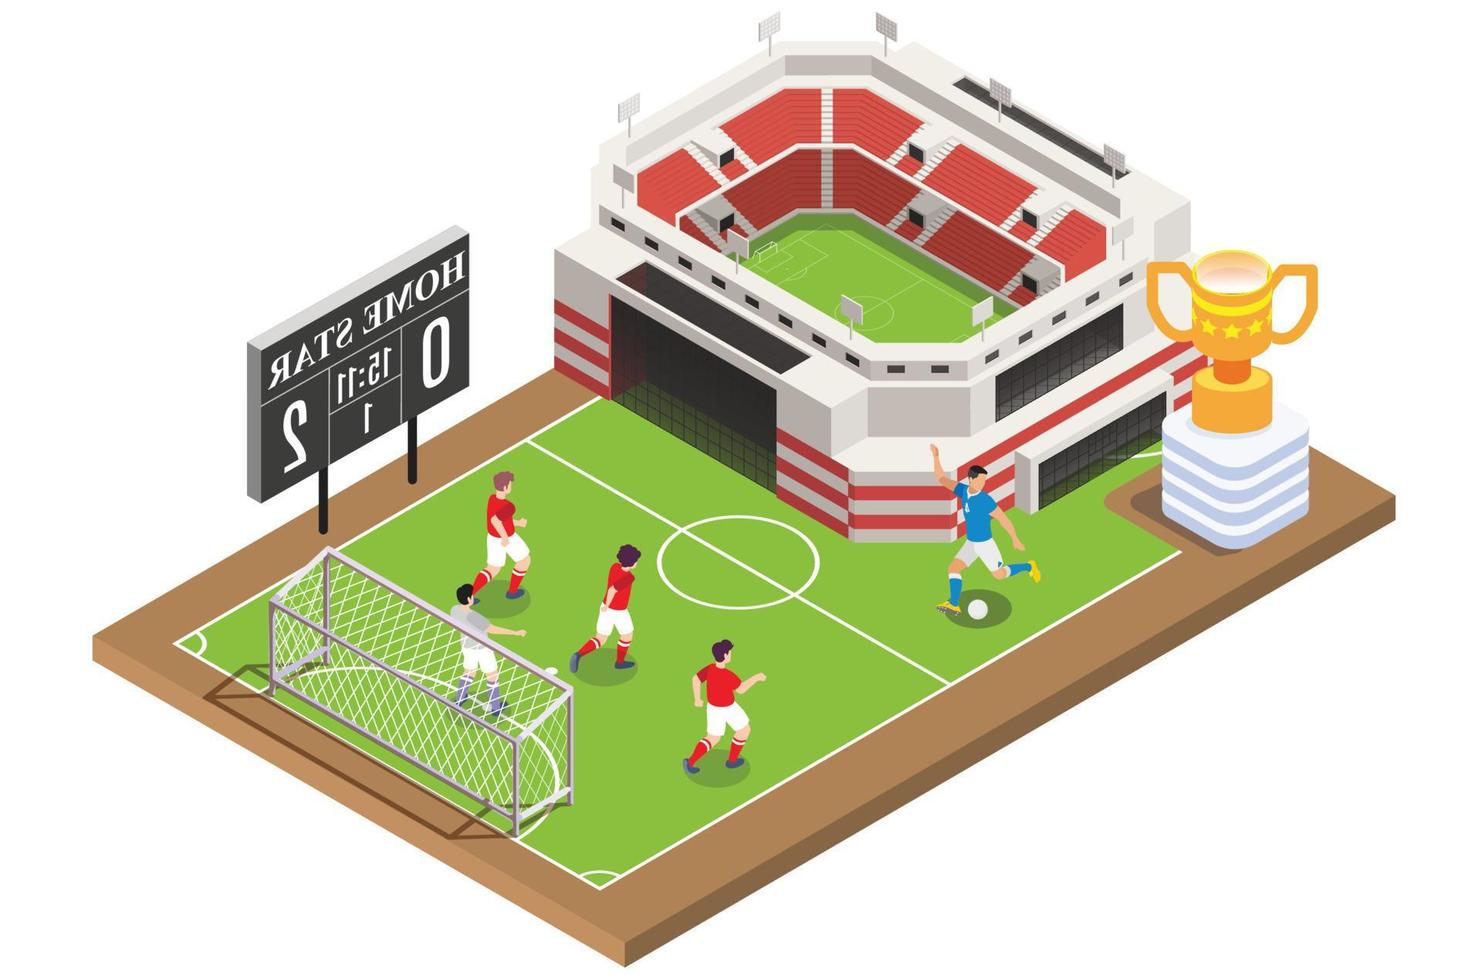 Modern Isometric Live Soccer Tournament with streets and stadiums Illustration, Suitable for Diagrams, Infographics, Book Illustration, Game Asset, And Other Graphic Related Assets vector